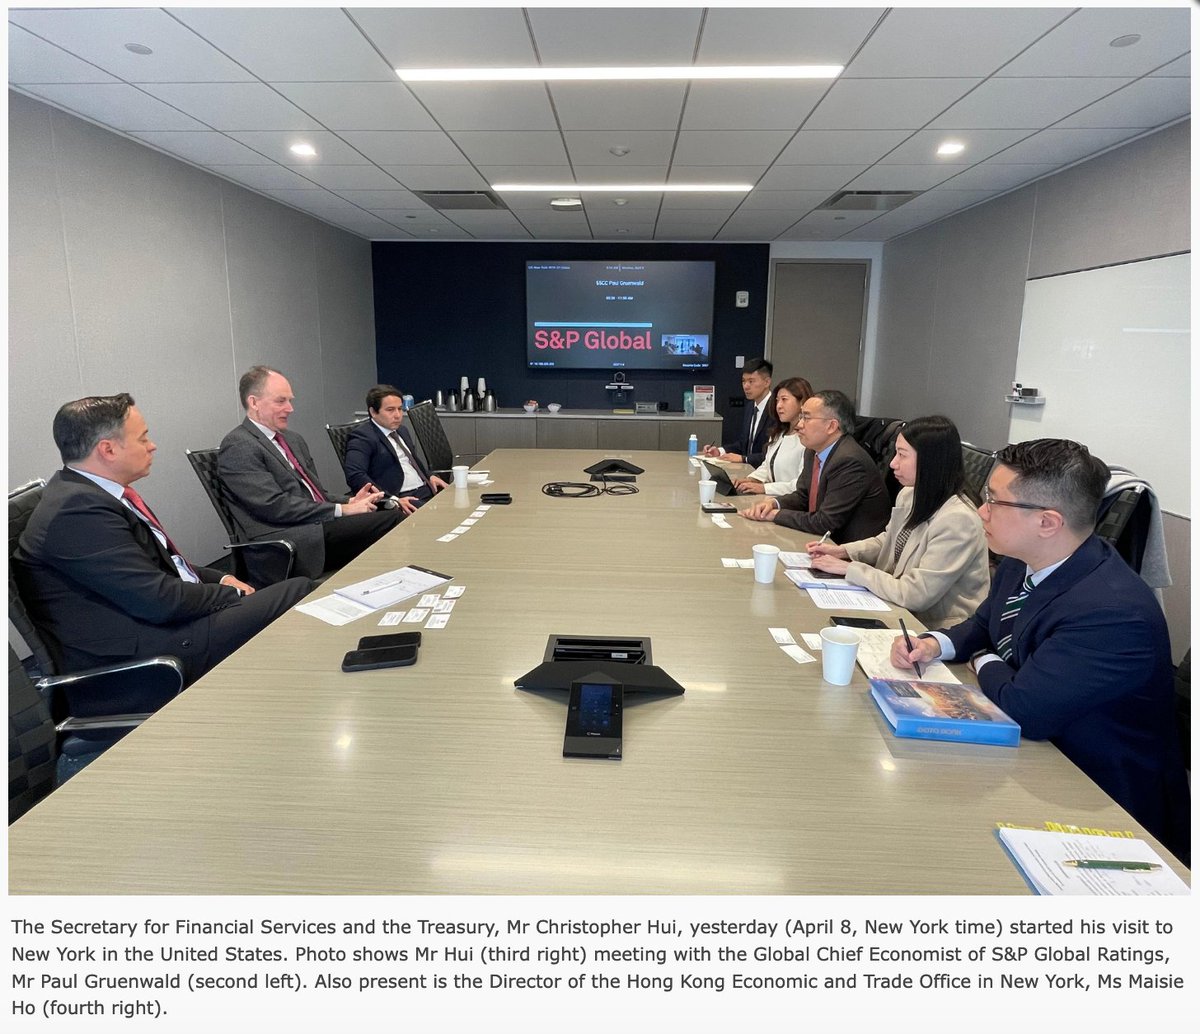 Hui also met @NewYorkFed head & representatives of @NYSE, @SPGlobalRatings & @NYCEDC. We call on government officials, businesses & other groups in the US to refrain from inviting &/or meeting HK government officials while they continue to crack down on the people of #HongKong,